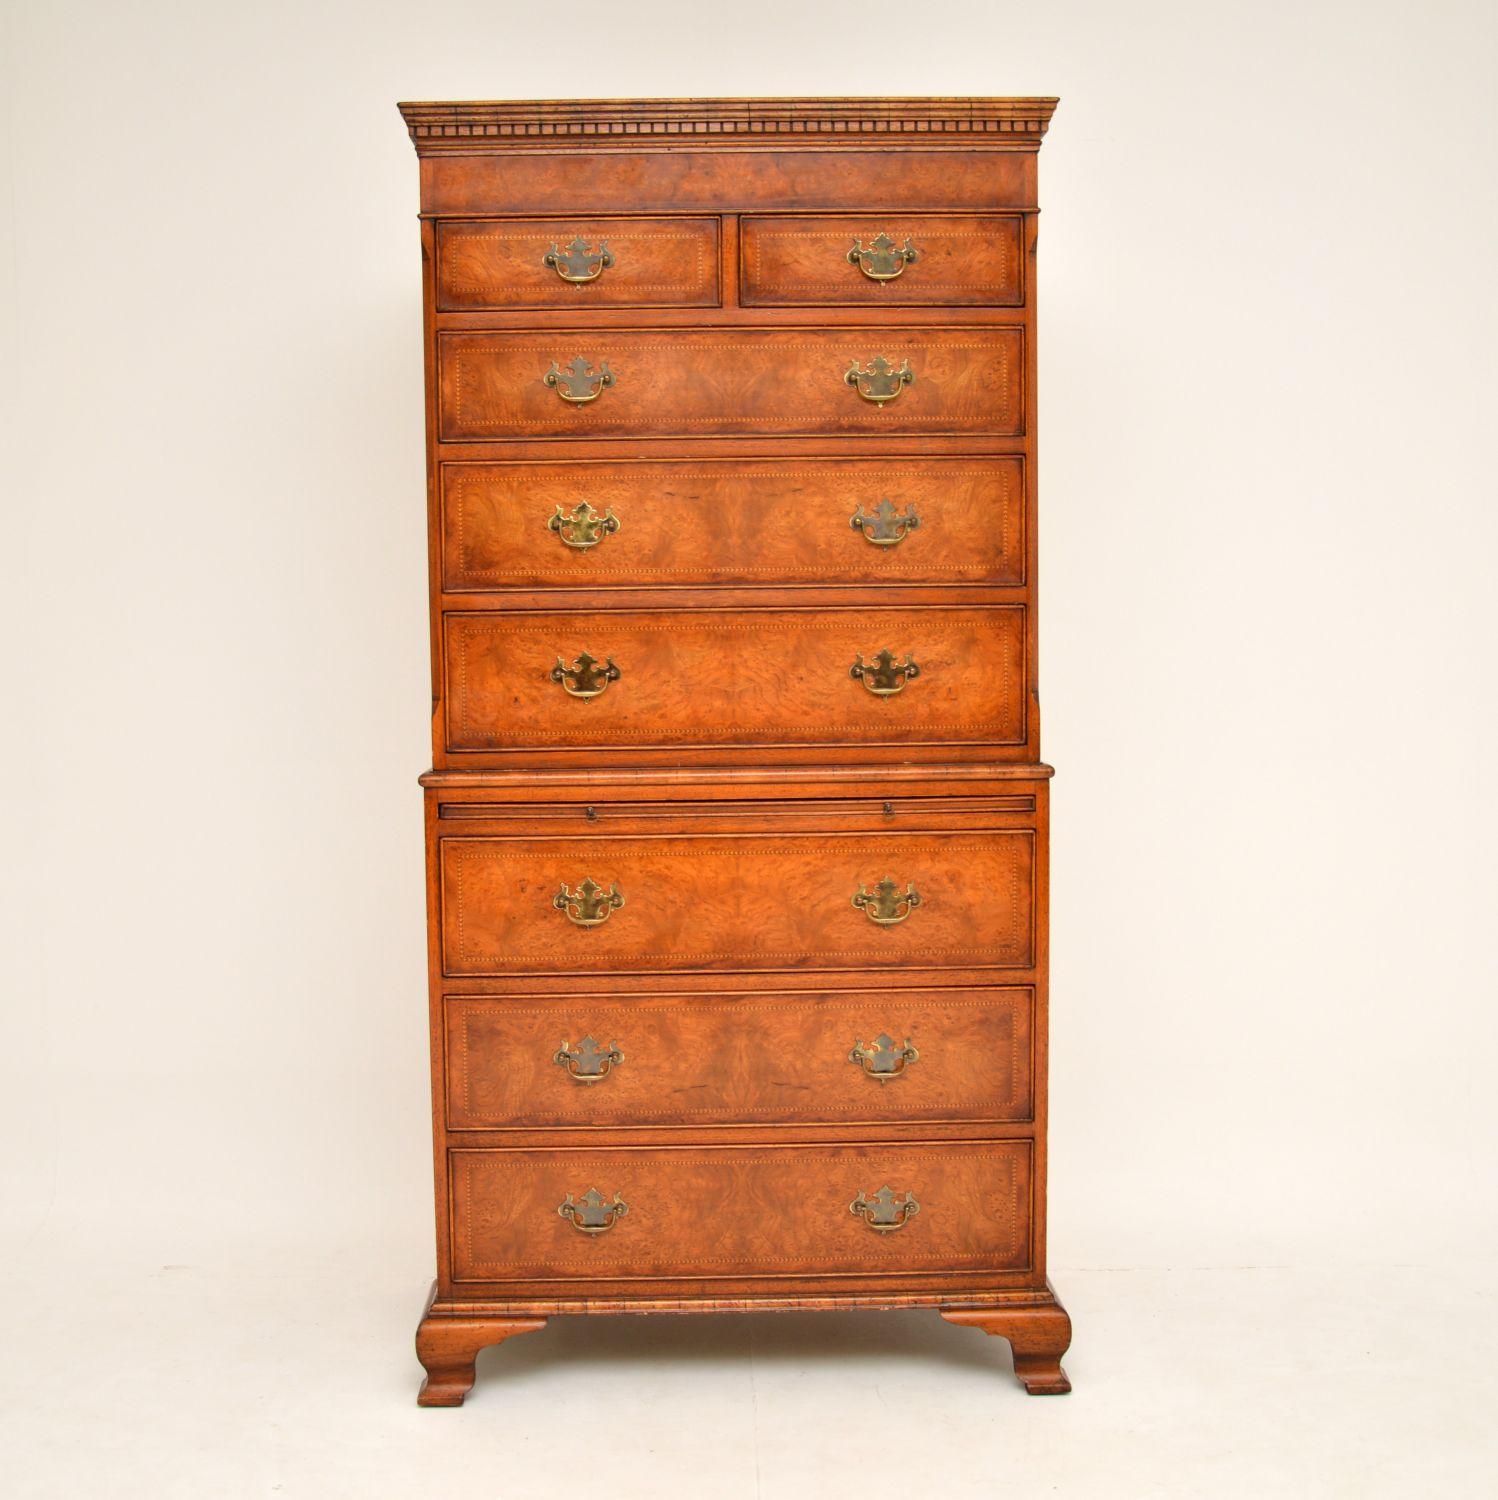 Antique George III style burr elm chest on chest with a wonderful color and in excellent condition, dating from circa 1930s period.

It has a dental frieze moulding below the cornice, canted corners, a brushing slide in the middle and sits on well